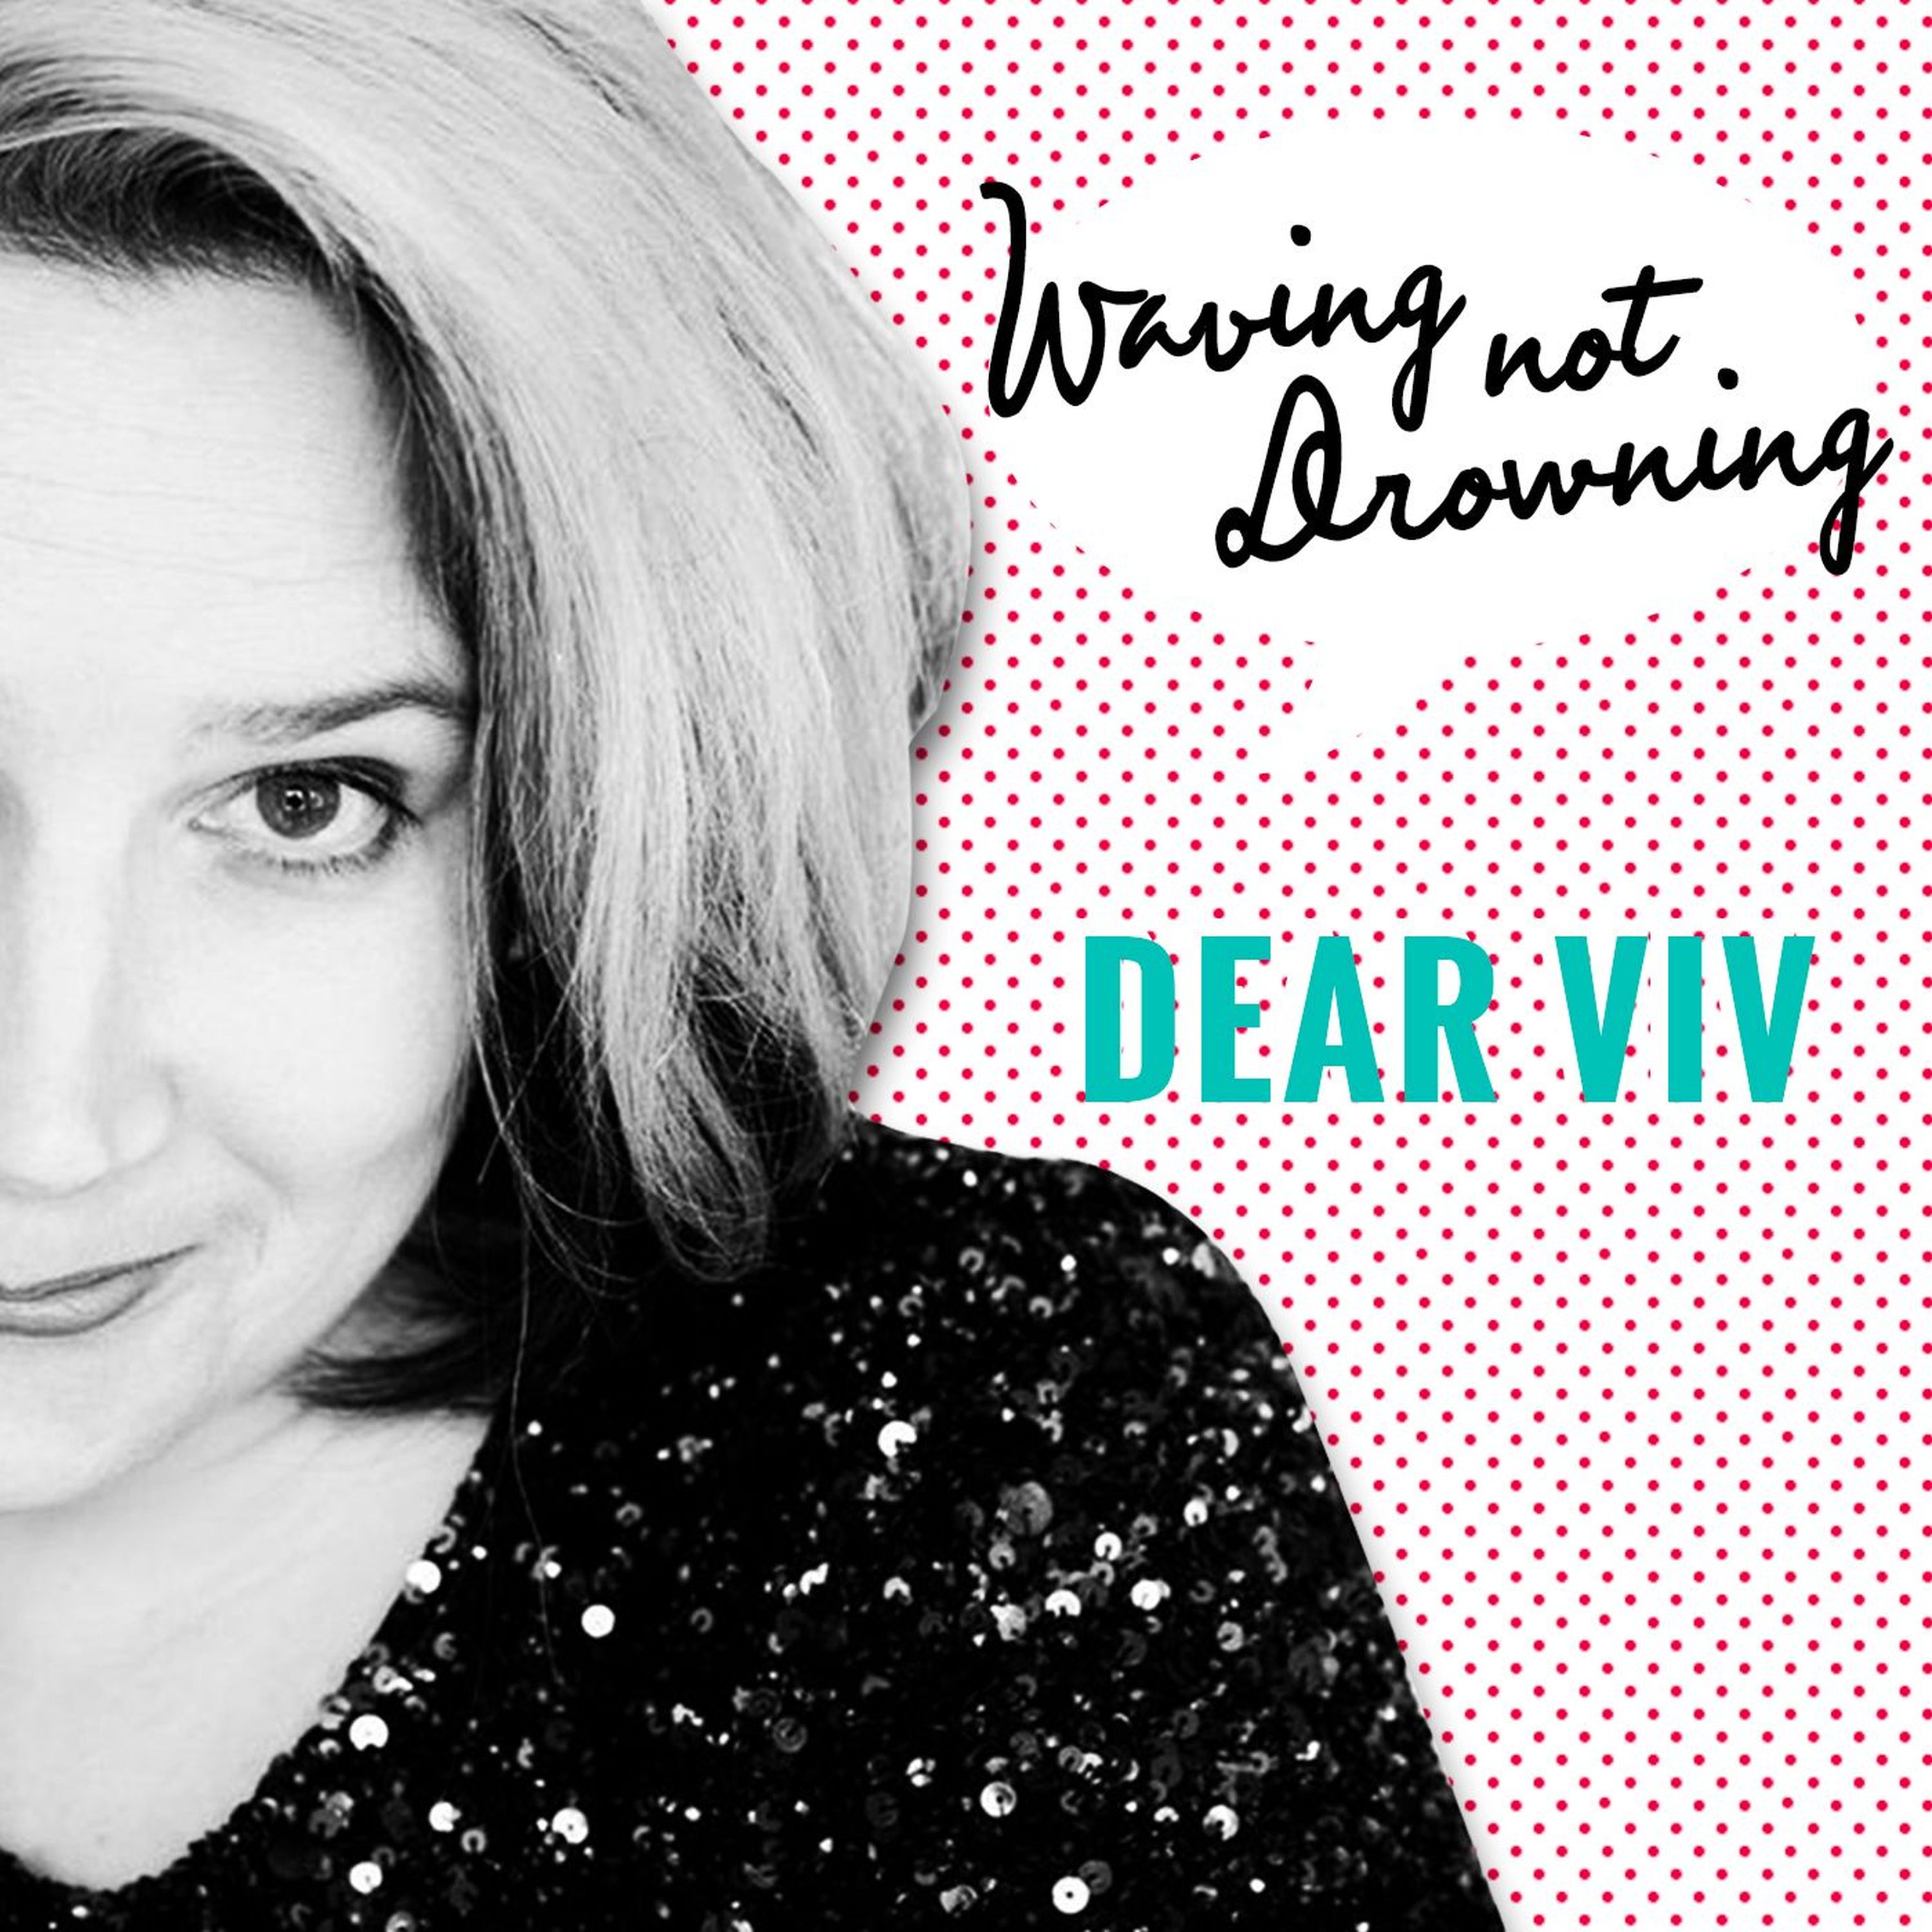 Dear Viv: I need to break up with my boyfriend, but he’s in a bad place